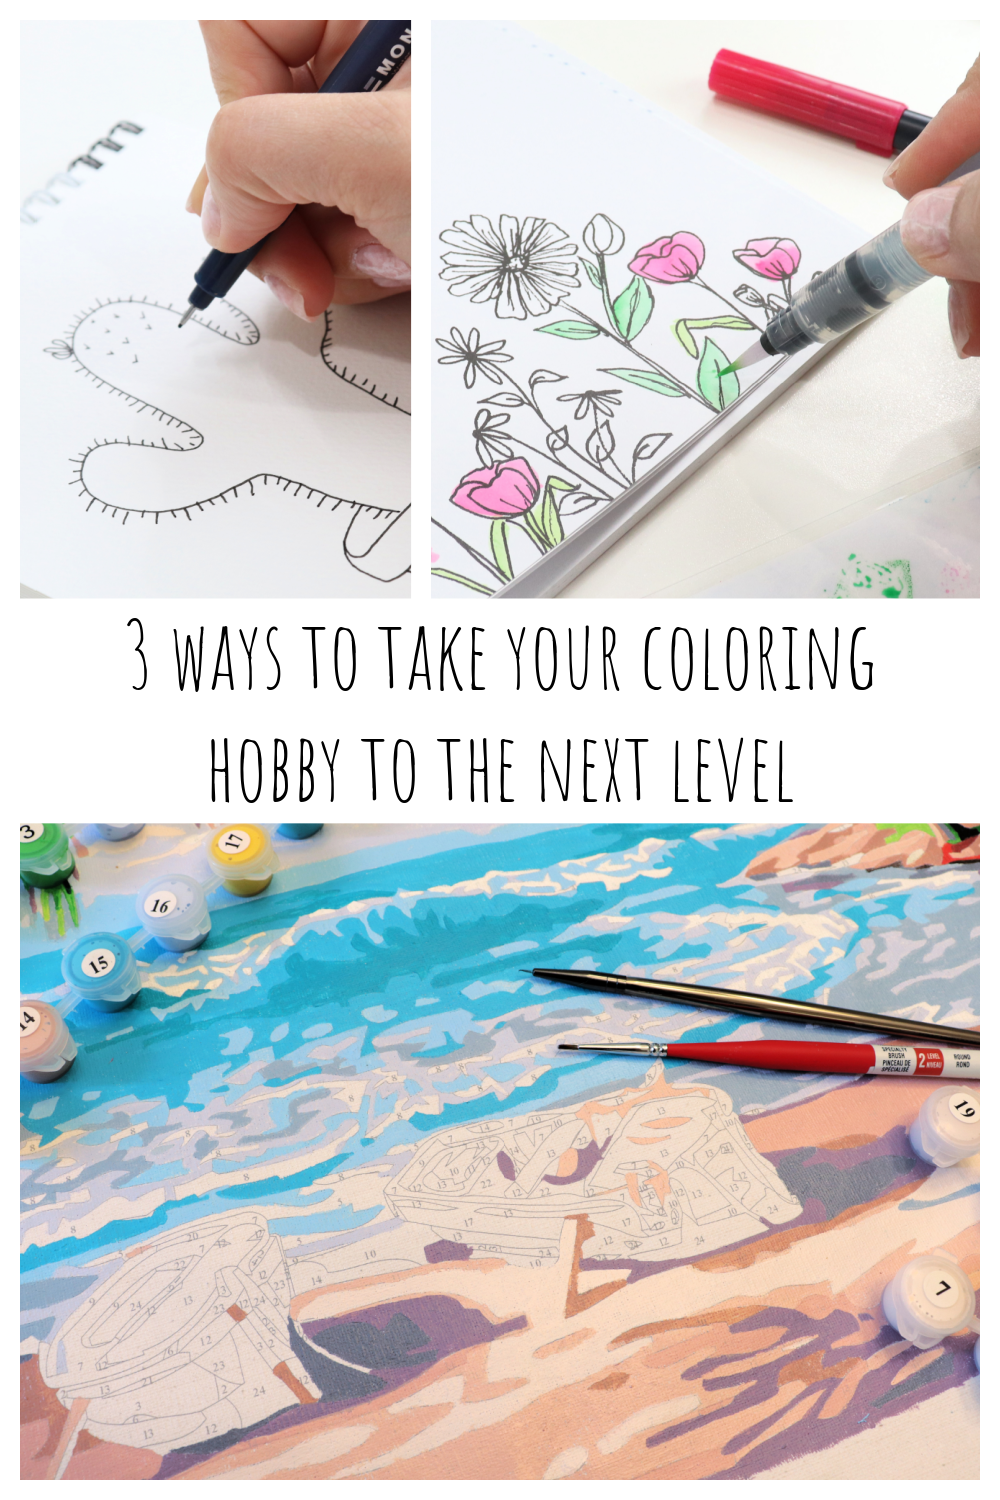 Take Your Coloring to the Next Level